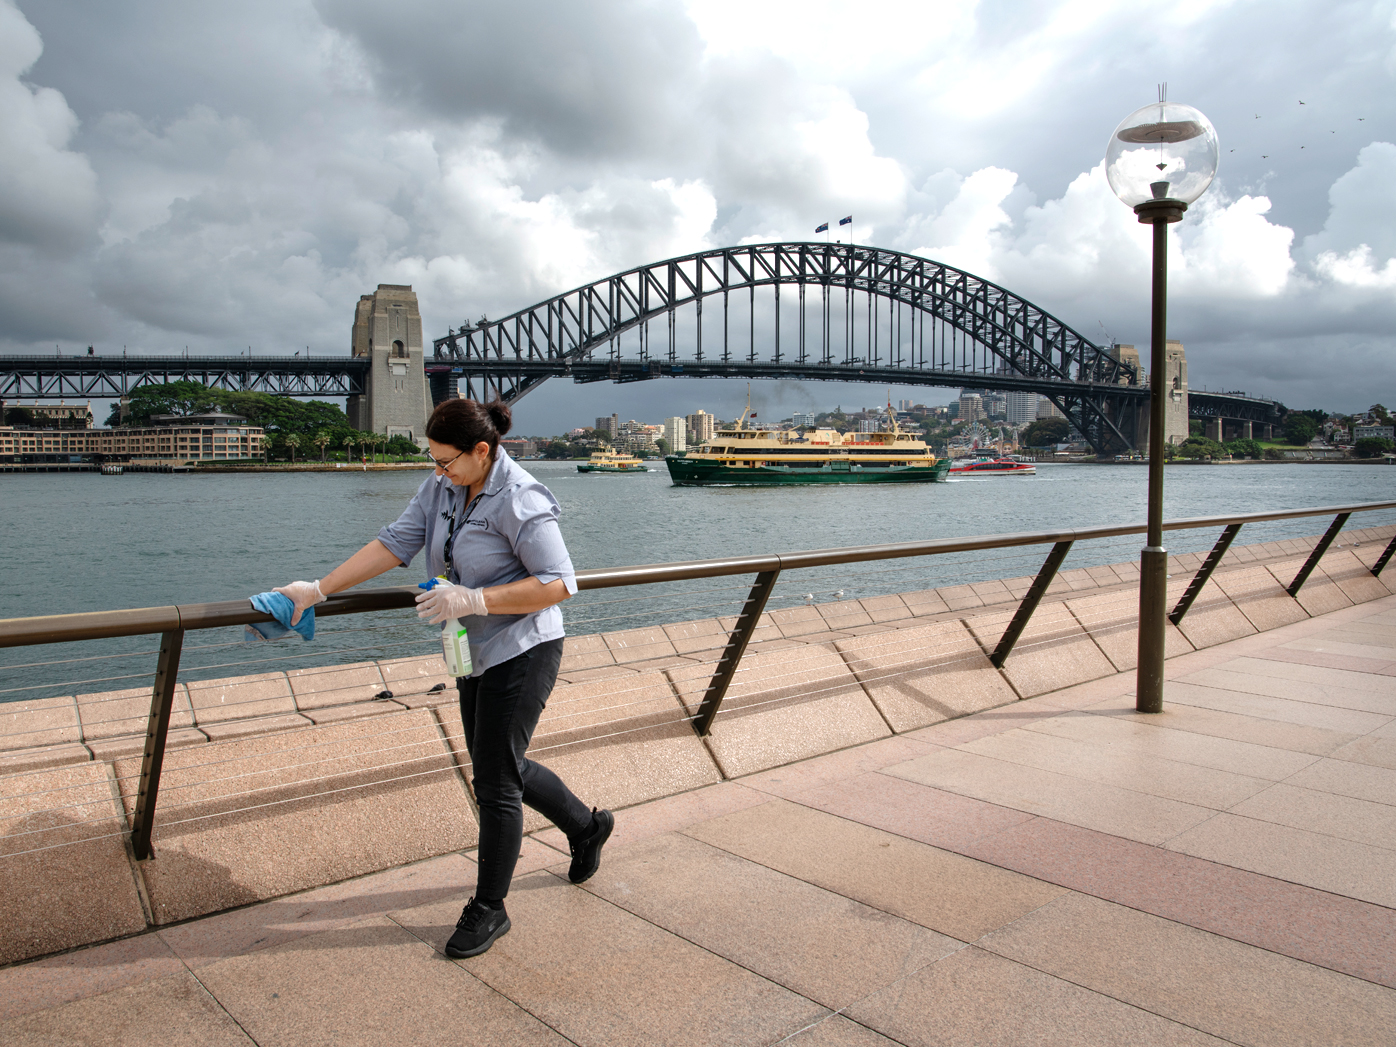 Railings being cleaned at the Sydney Opera House forecourt during the coronavirus crisis.